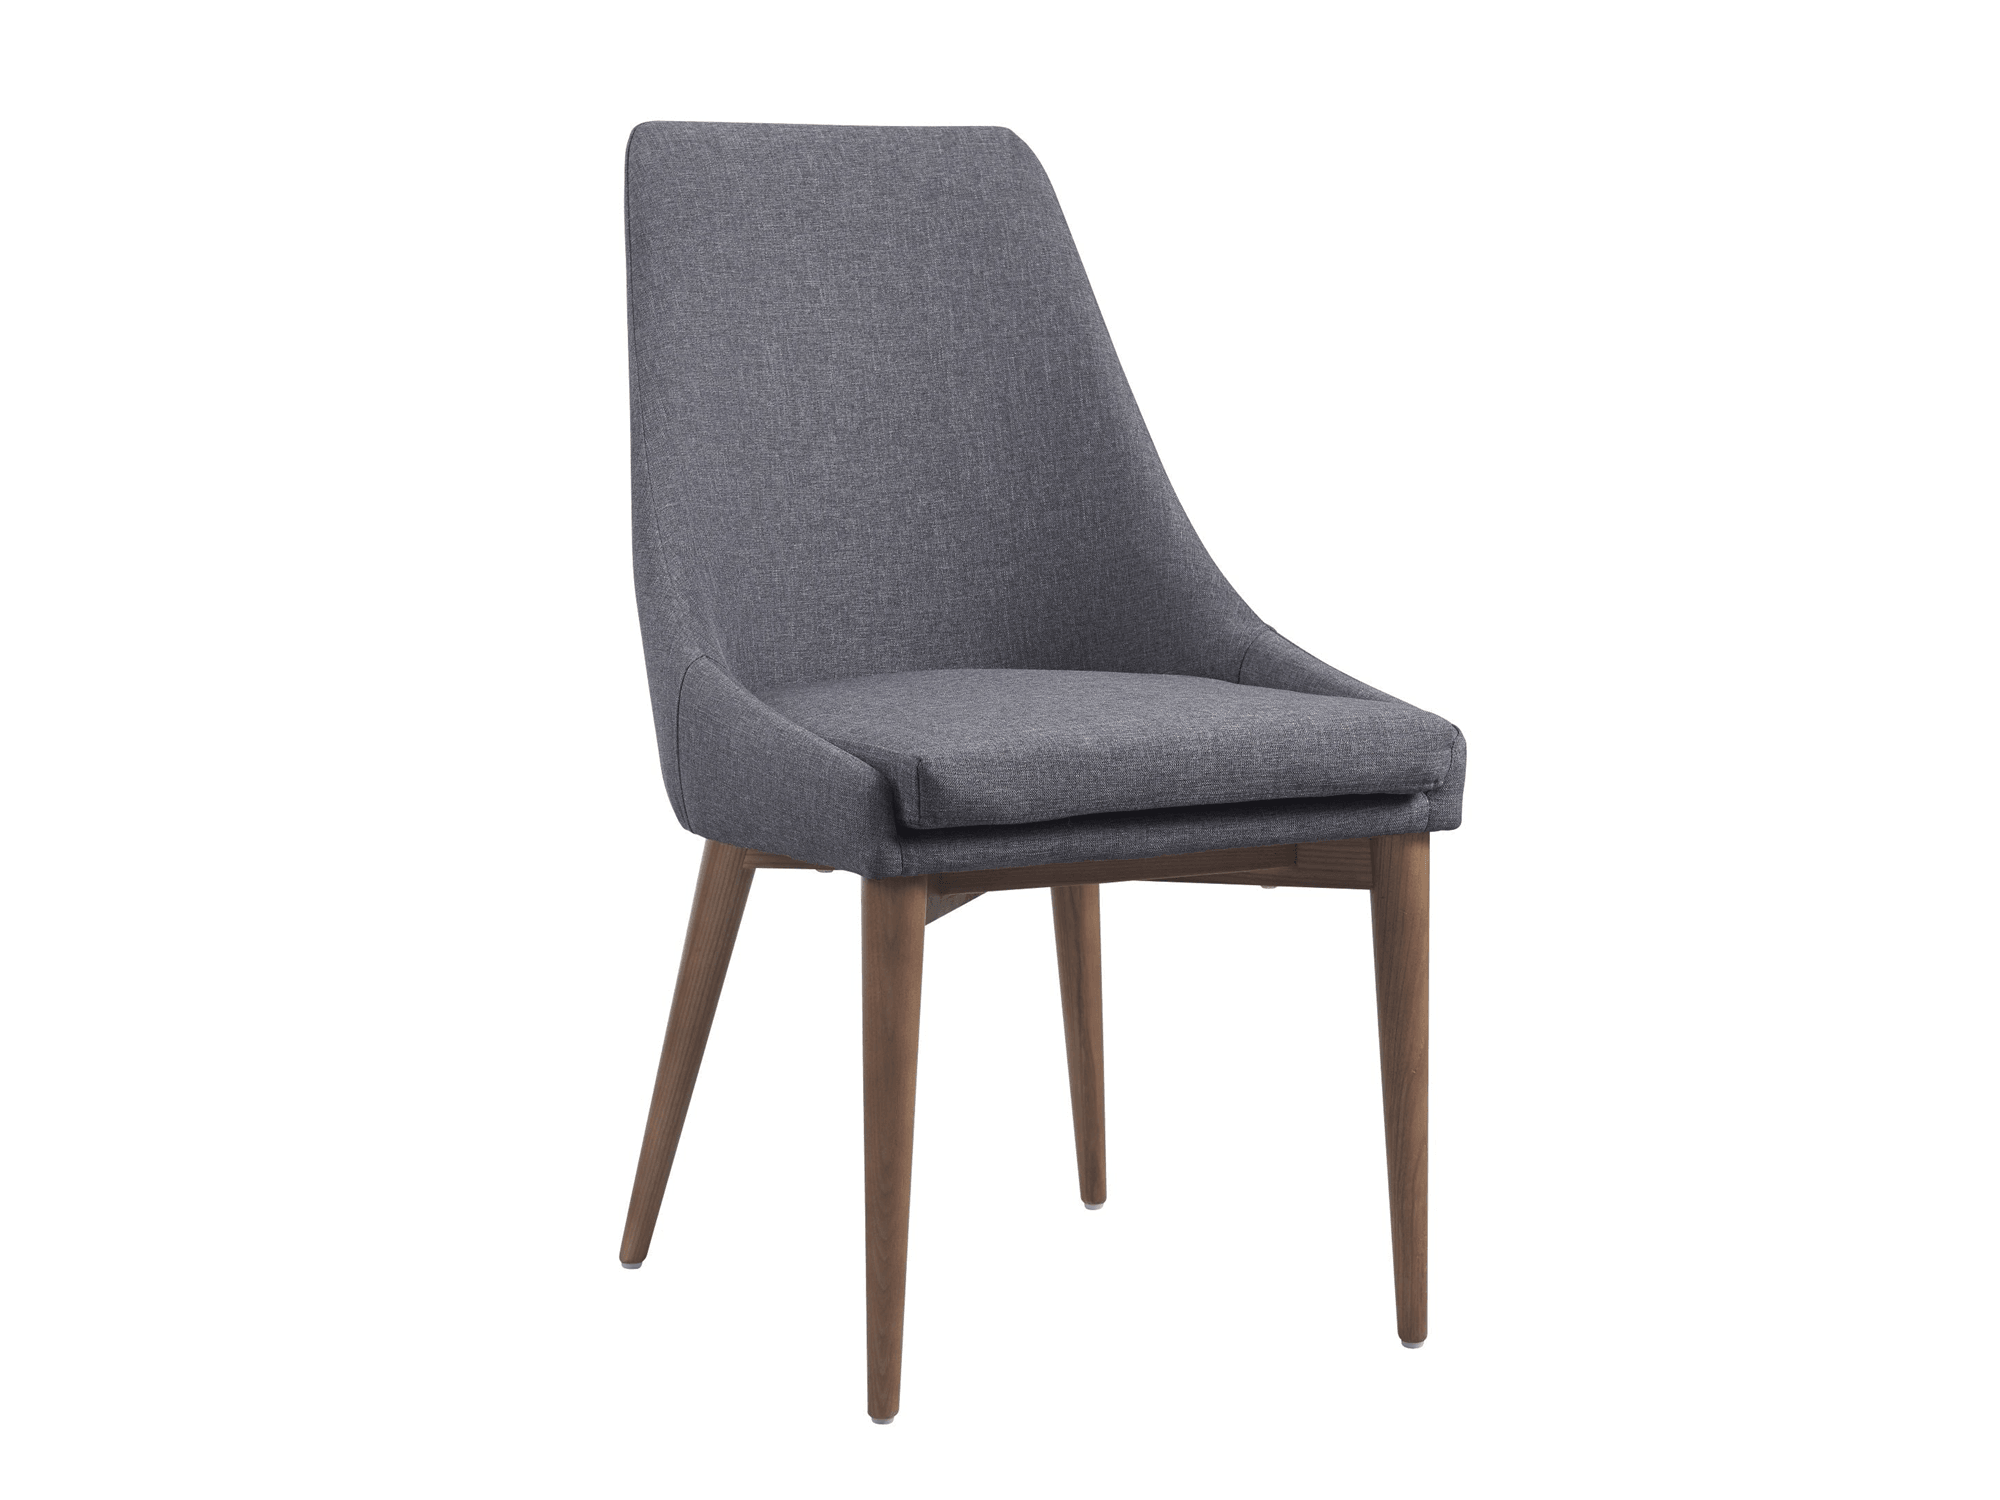 Brisk Dining Chair - Euro Living Furniture